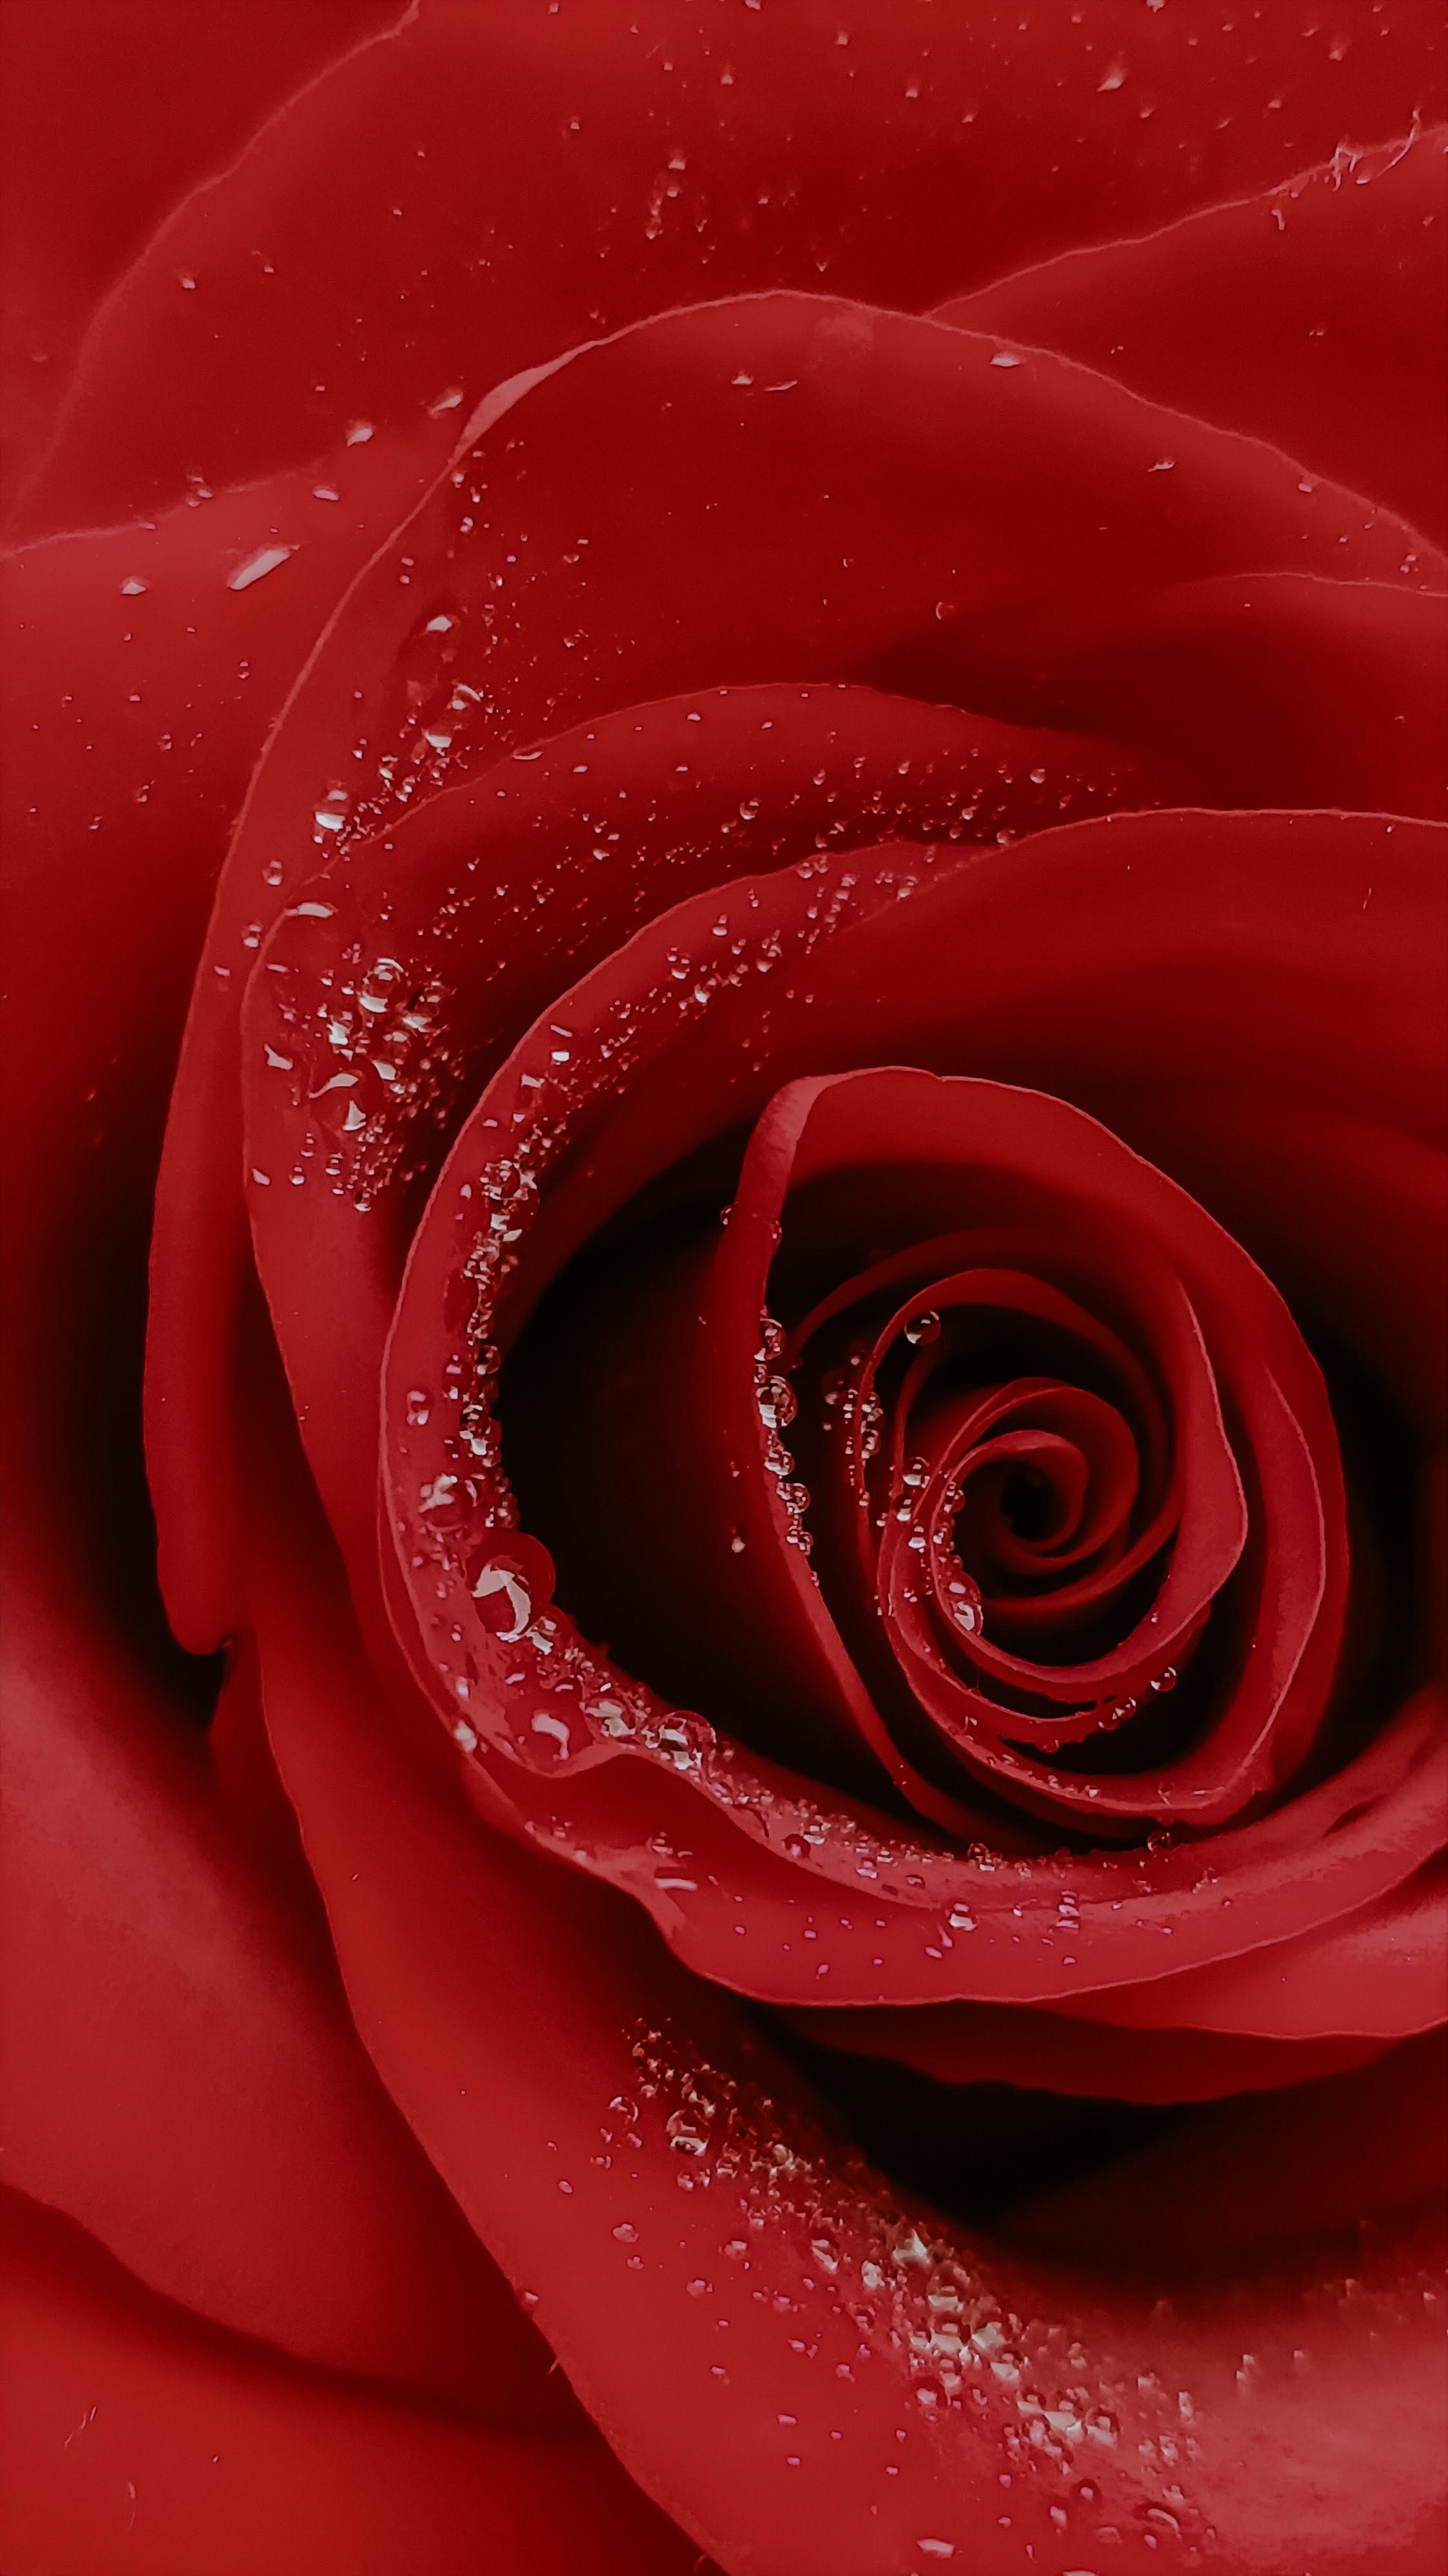 91743 download wallpaper rose flower, drops, flower, macro, rose screensavers and pictures for free